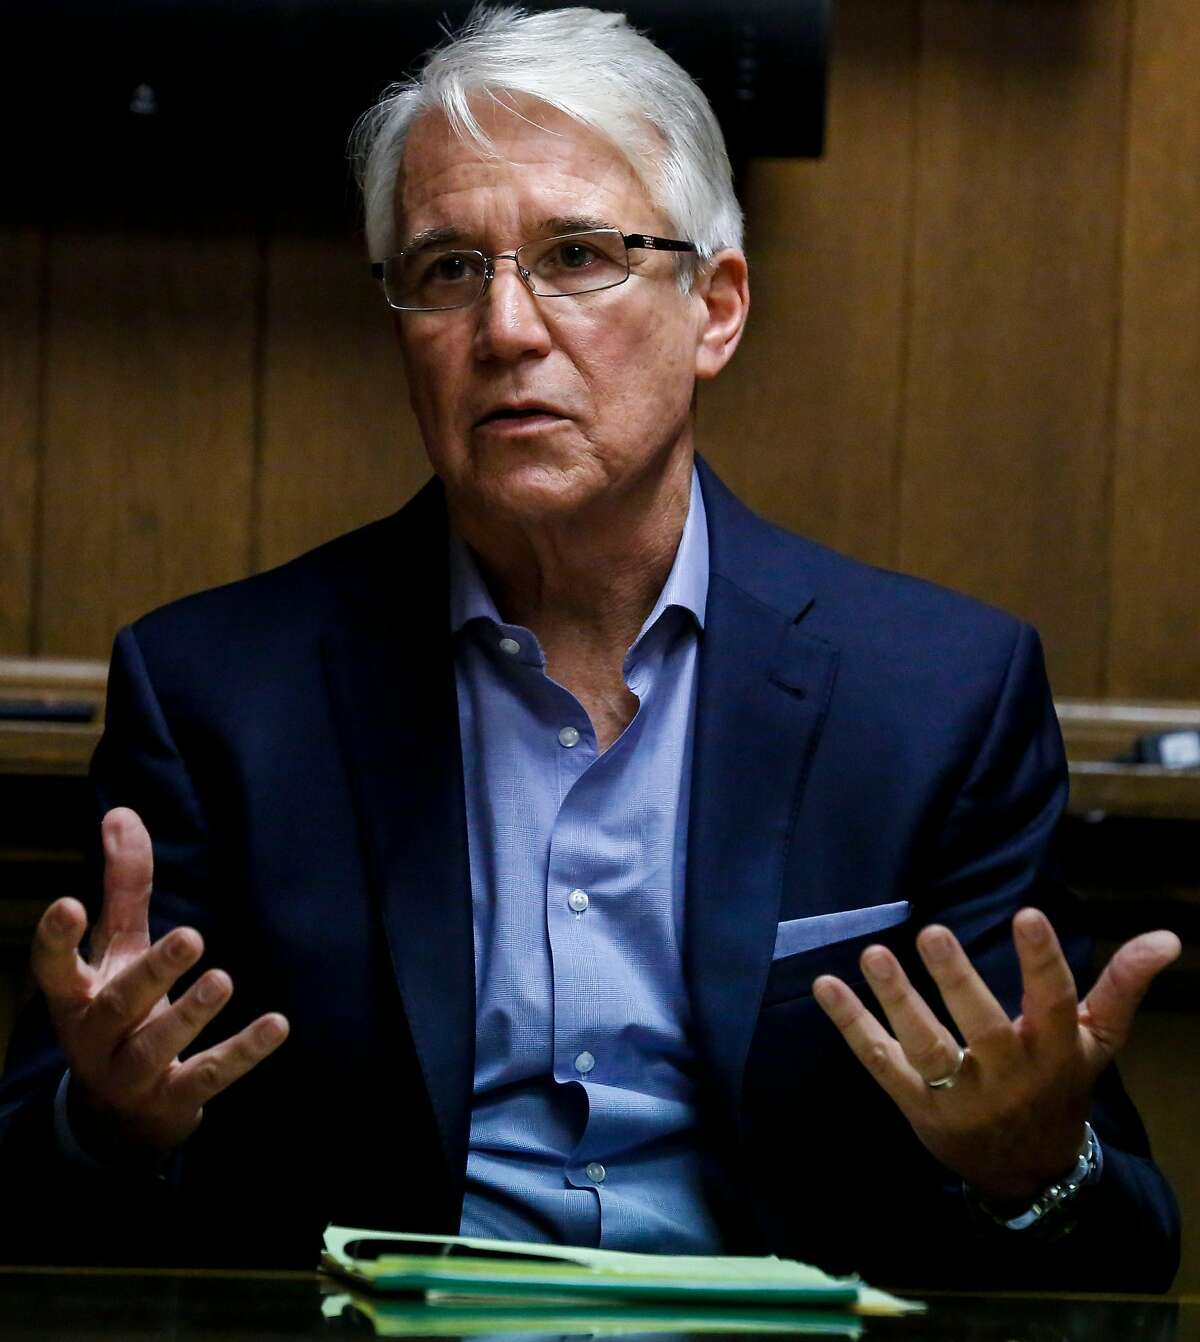 This file photo shows former S.F. District Attorney George Gascon on July 10, 2019, in San Francisco, Calif. He is running for district attorney of Los Angeles.